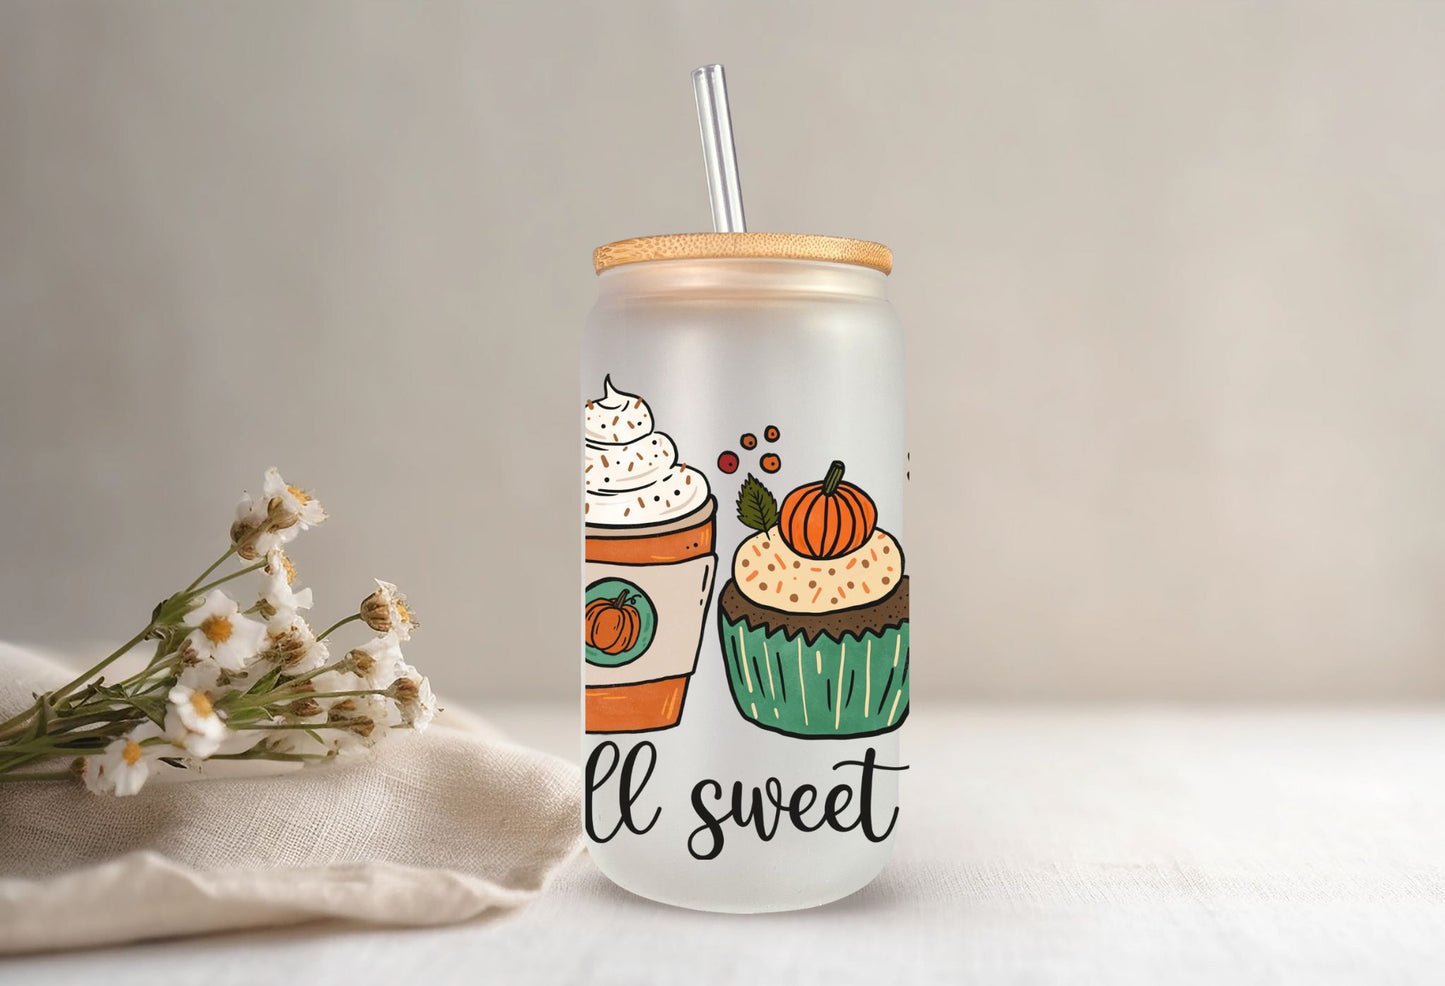 Enjoy your Pumpkin Spice in this 'Fall Sweet Fall" 16 oz Frosted Libbey Style Glass with Bamboo lid and straw